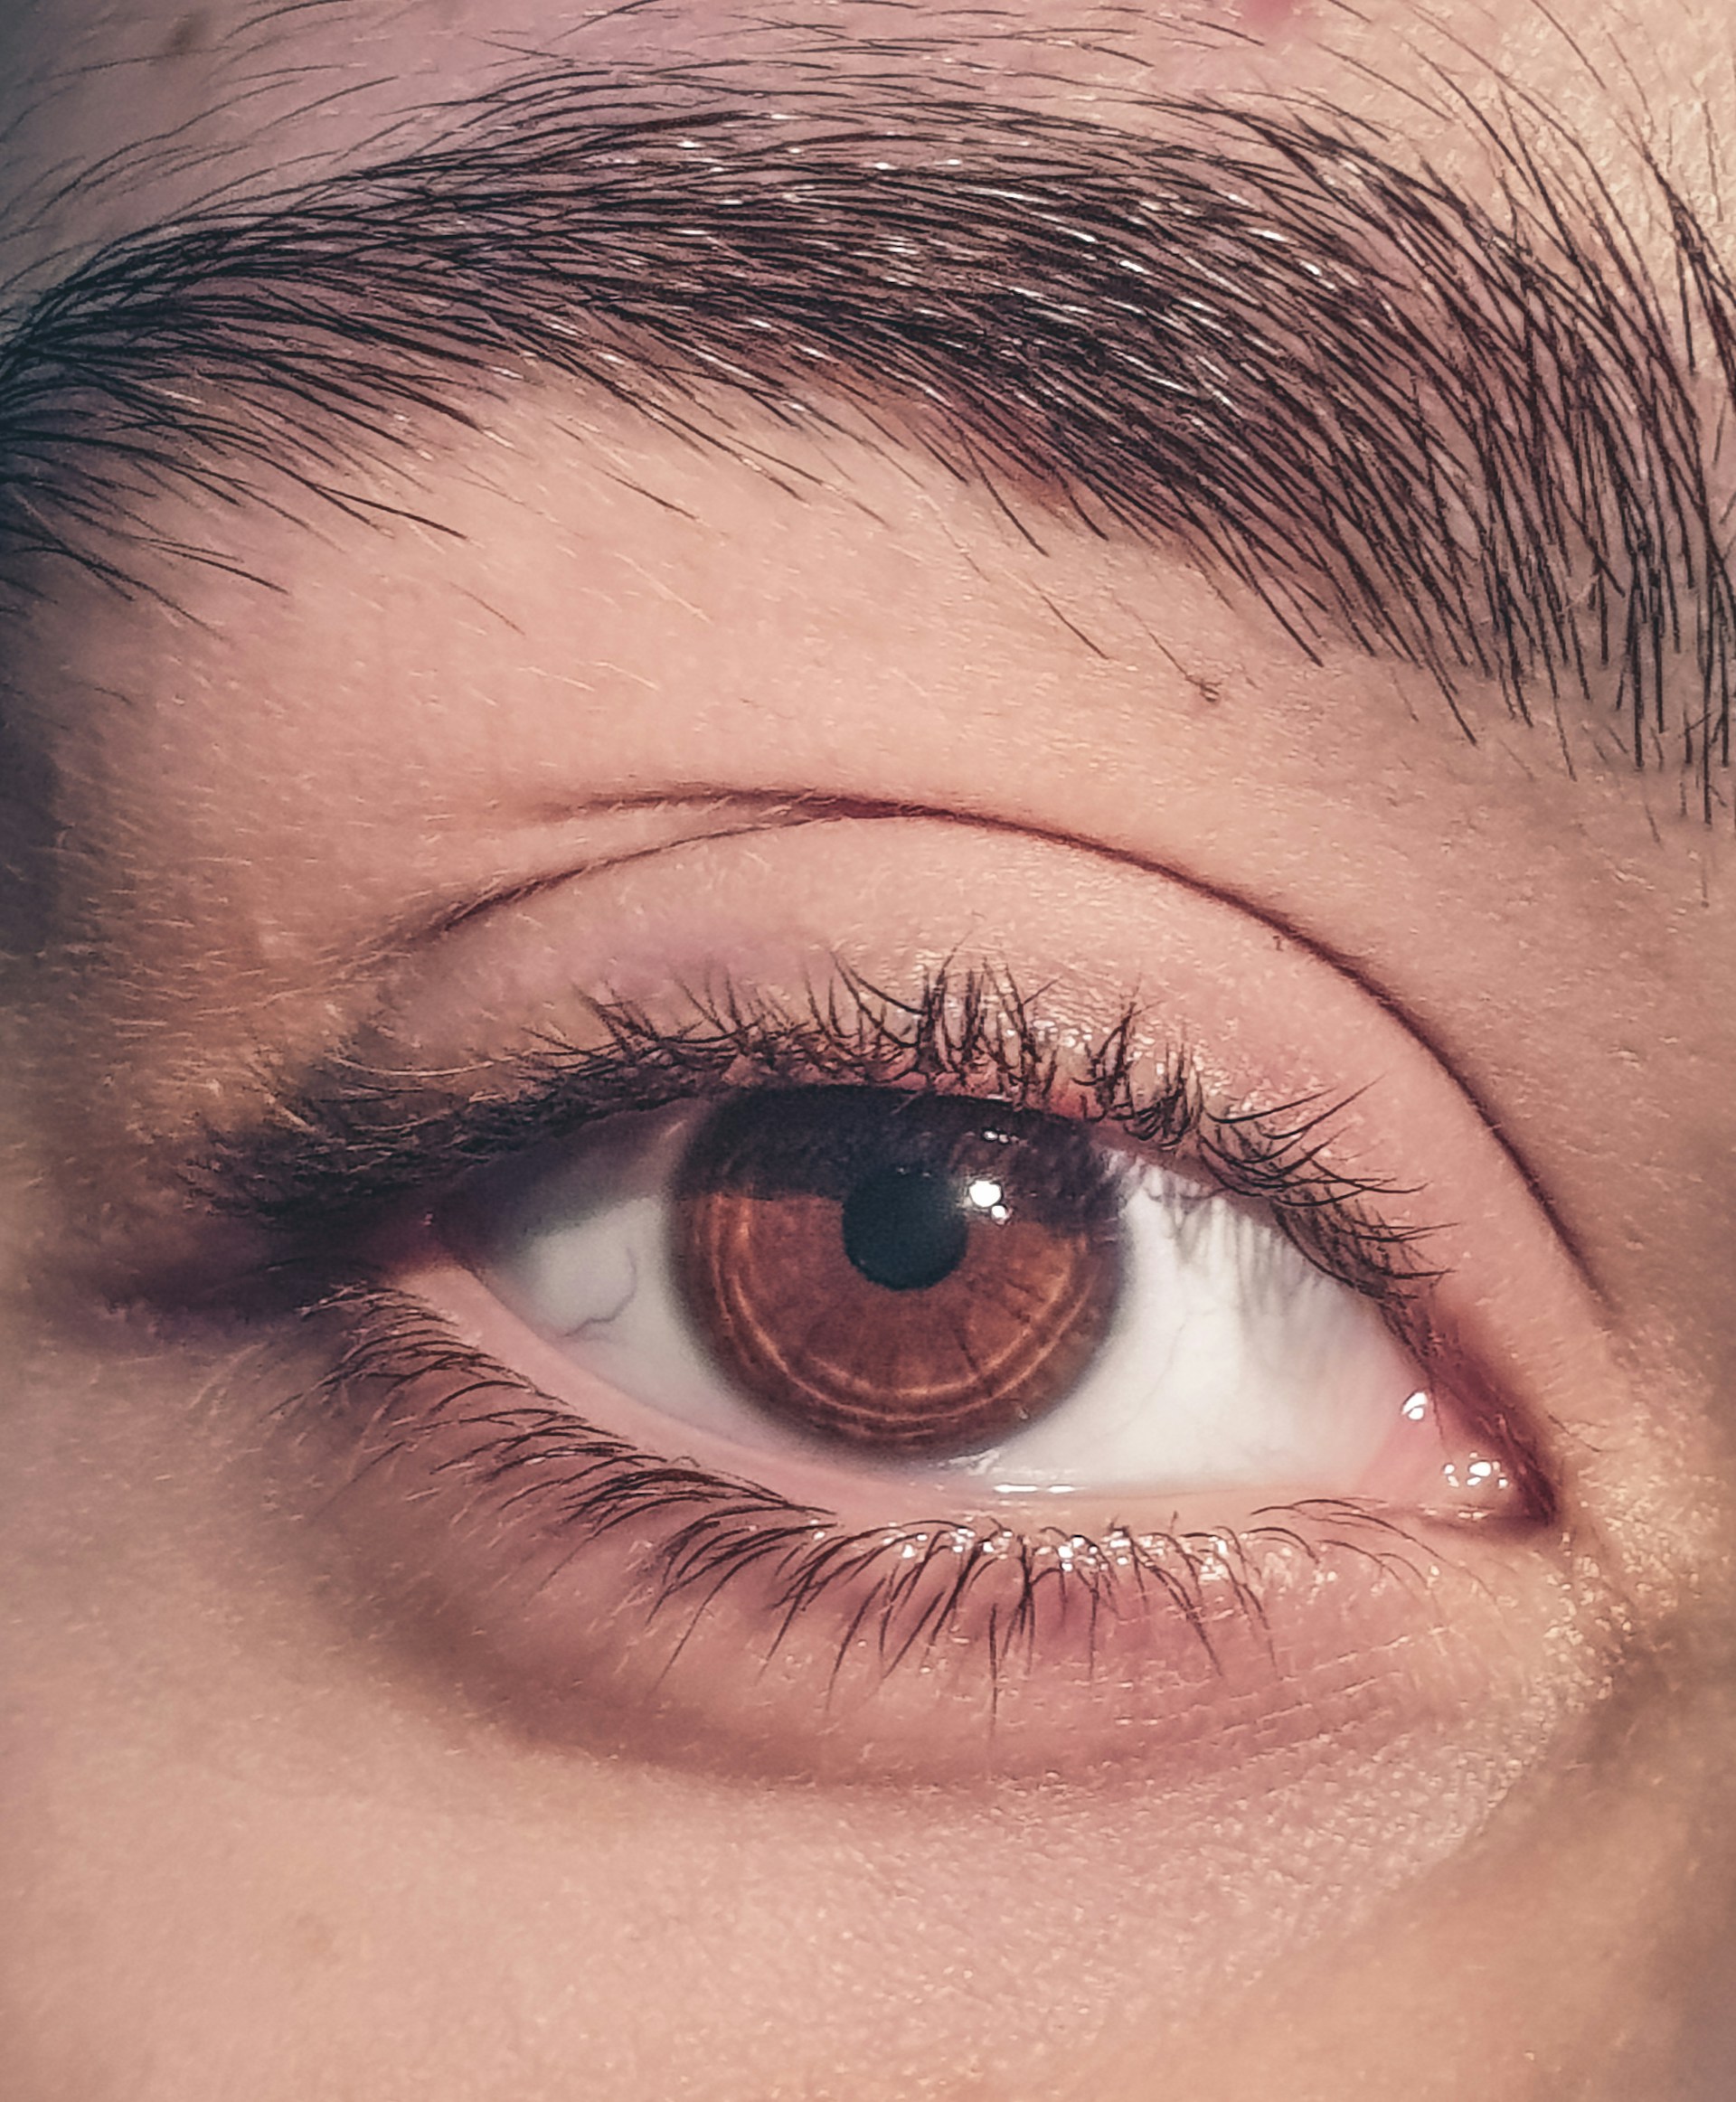 A close-up of brown eyes | Source: Unsplash